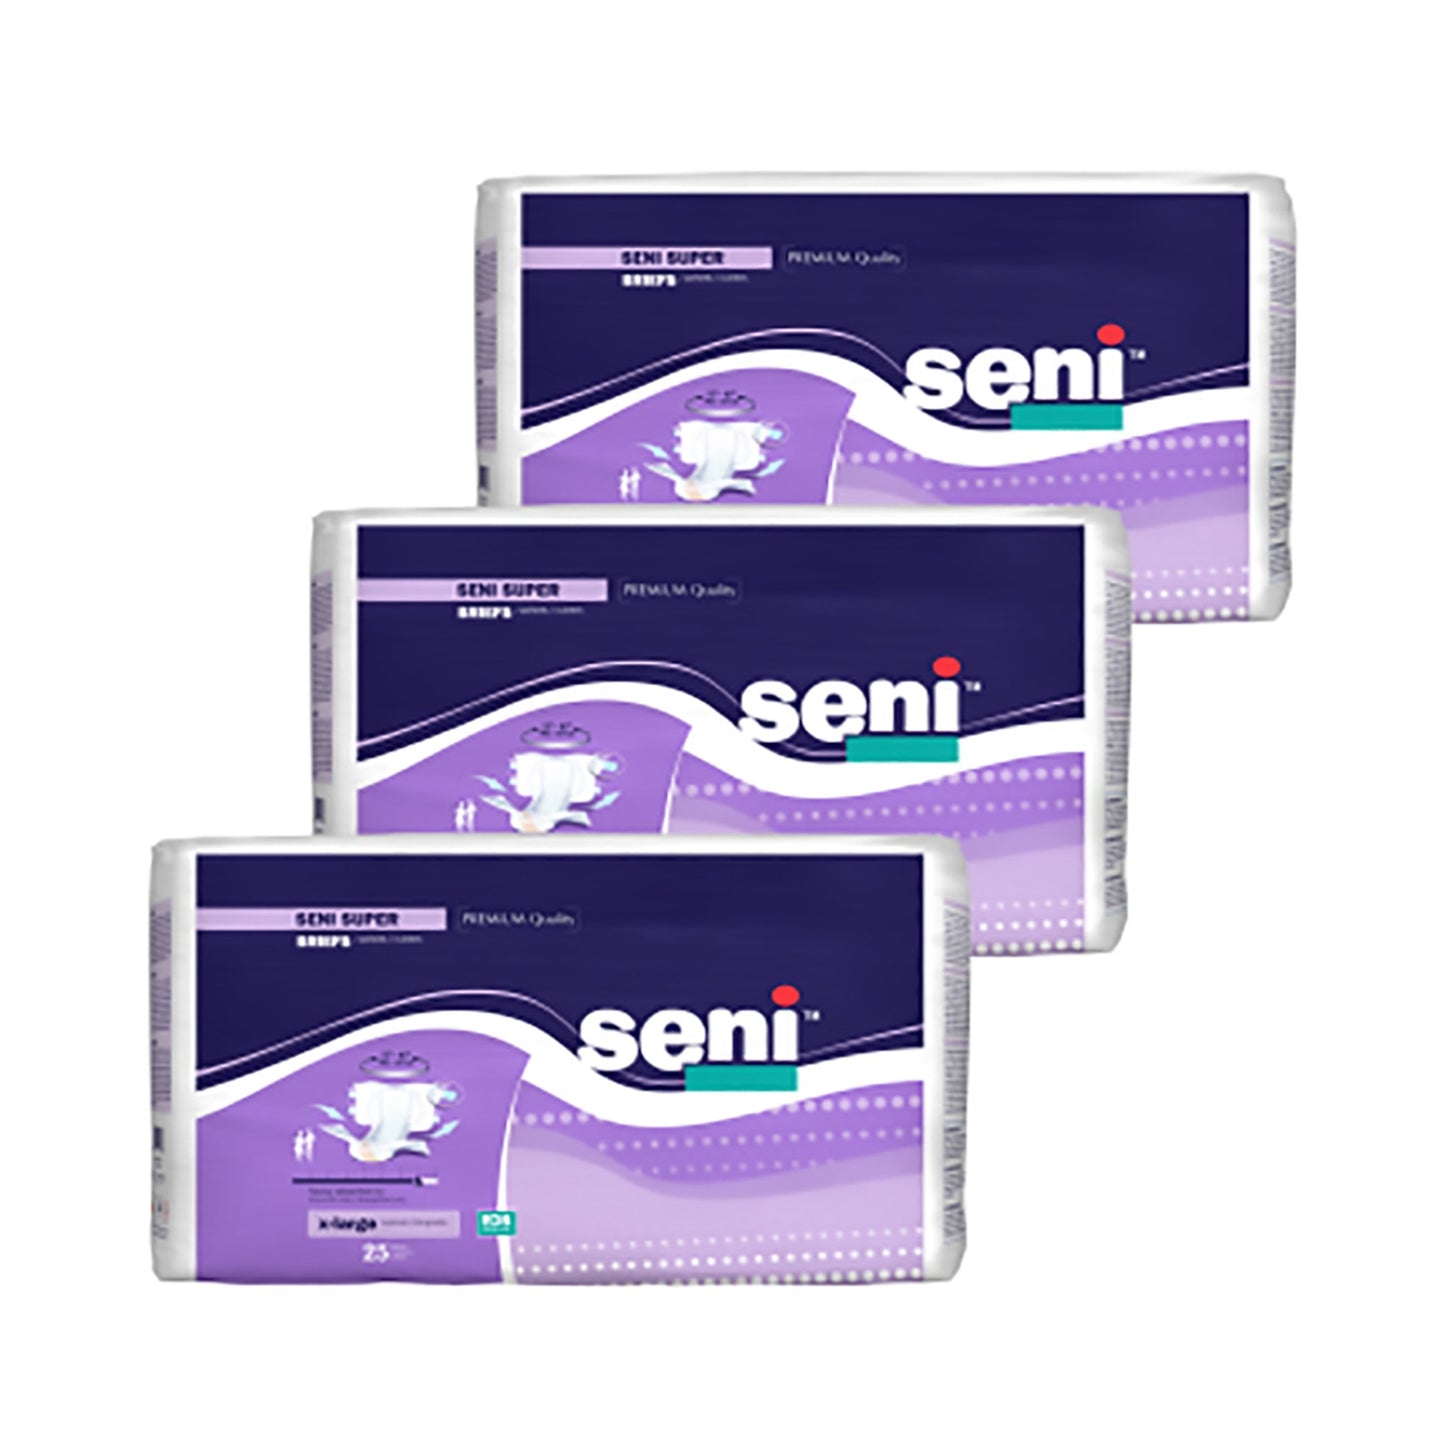 Seni® Super Heavy Absorbency Incontinence Brief, XL, 25 ct